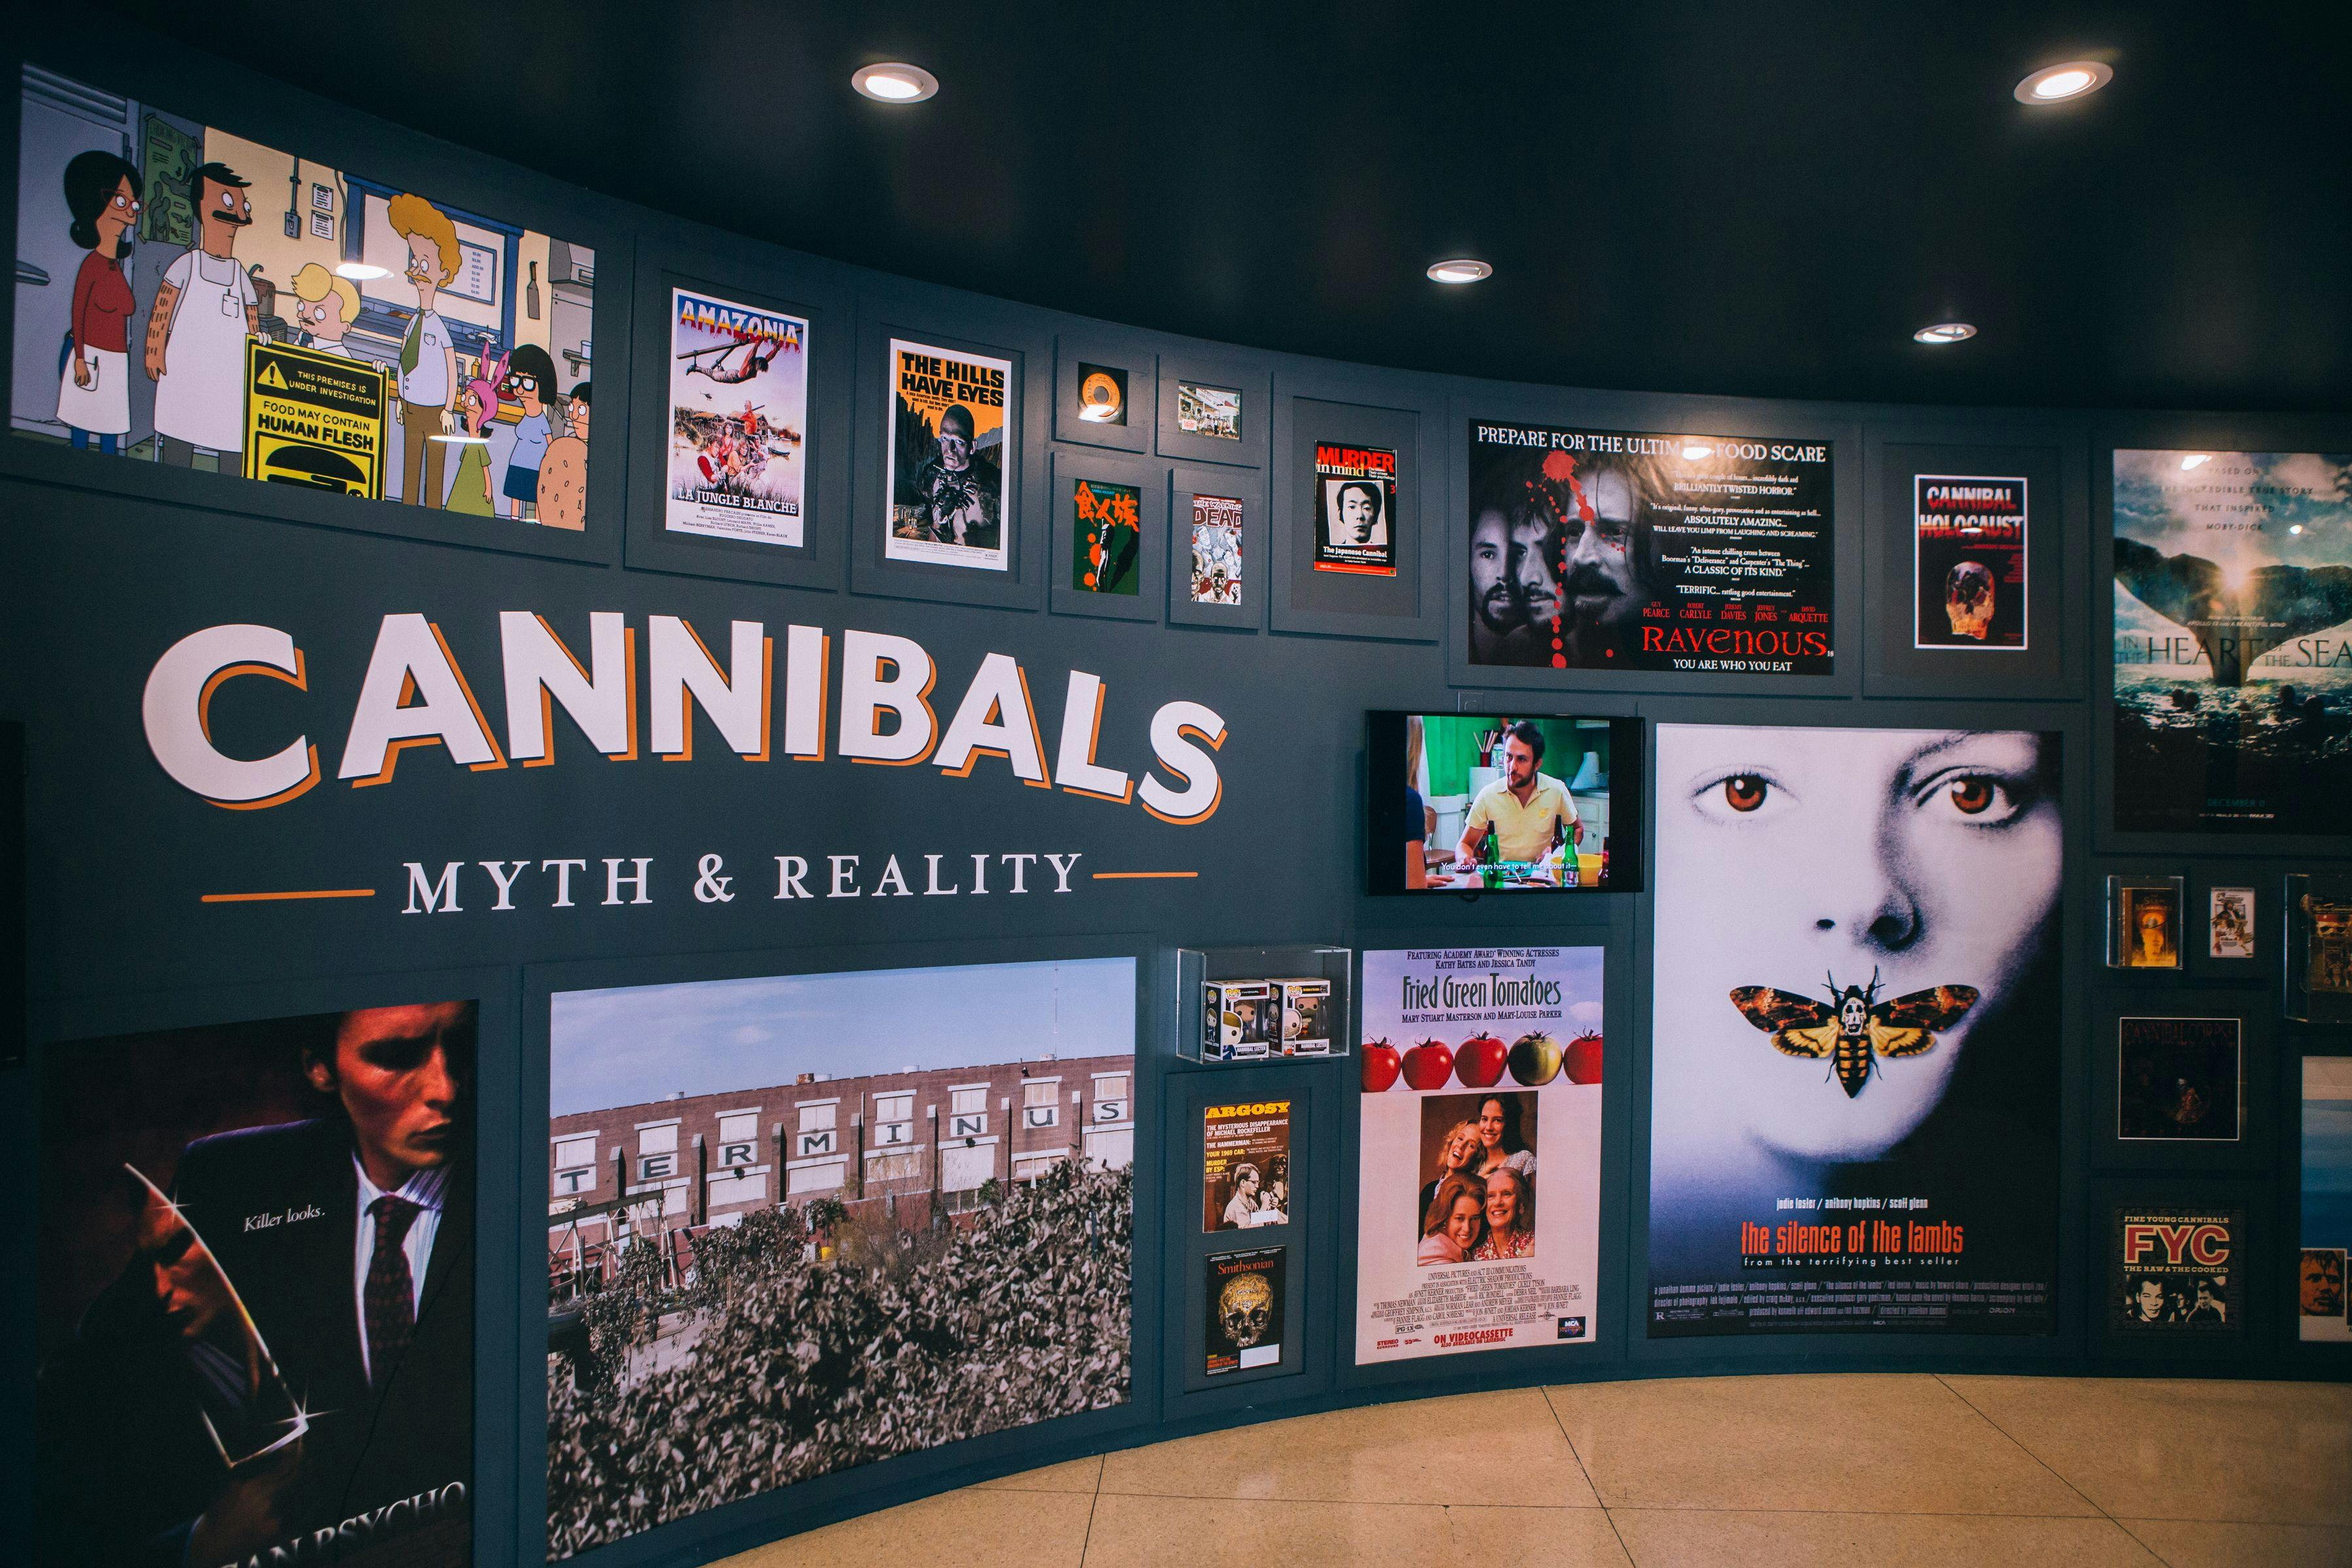 Graphic installation of various movie posters and prints hung on an exhibition wall titled 'Cannibals: Myth & Reality'.